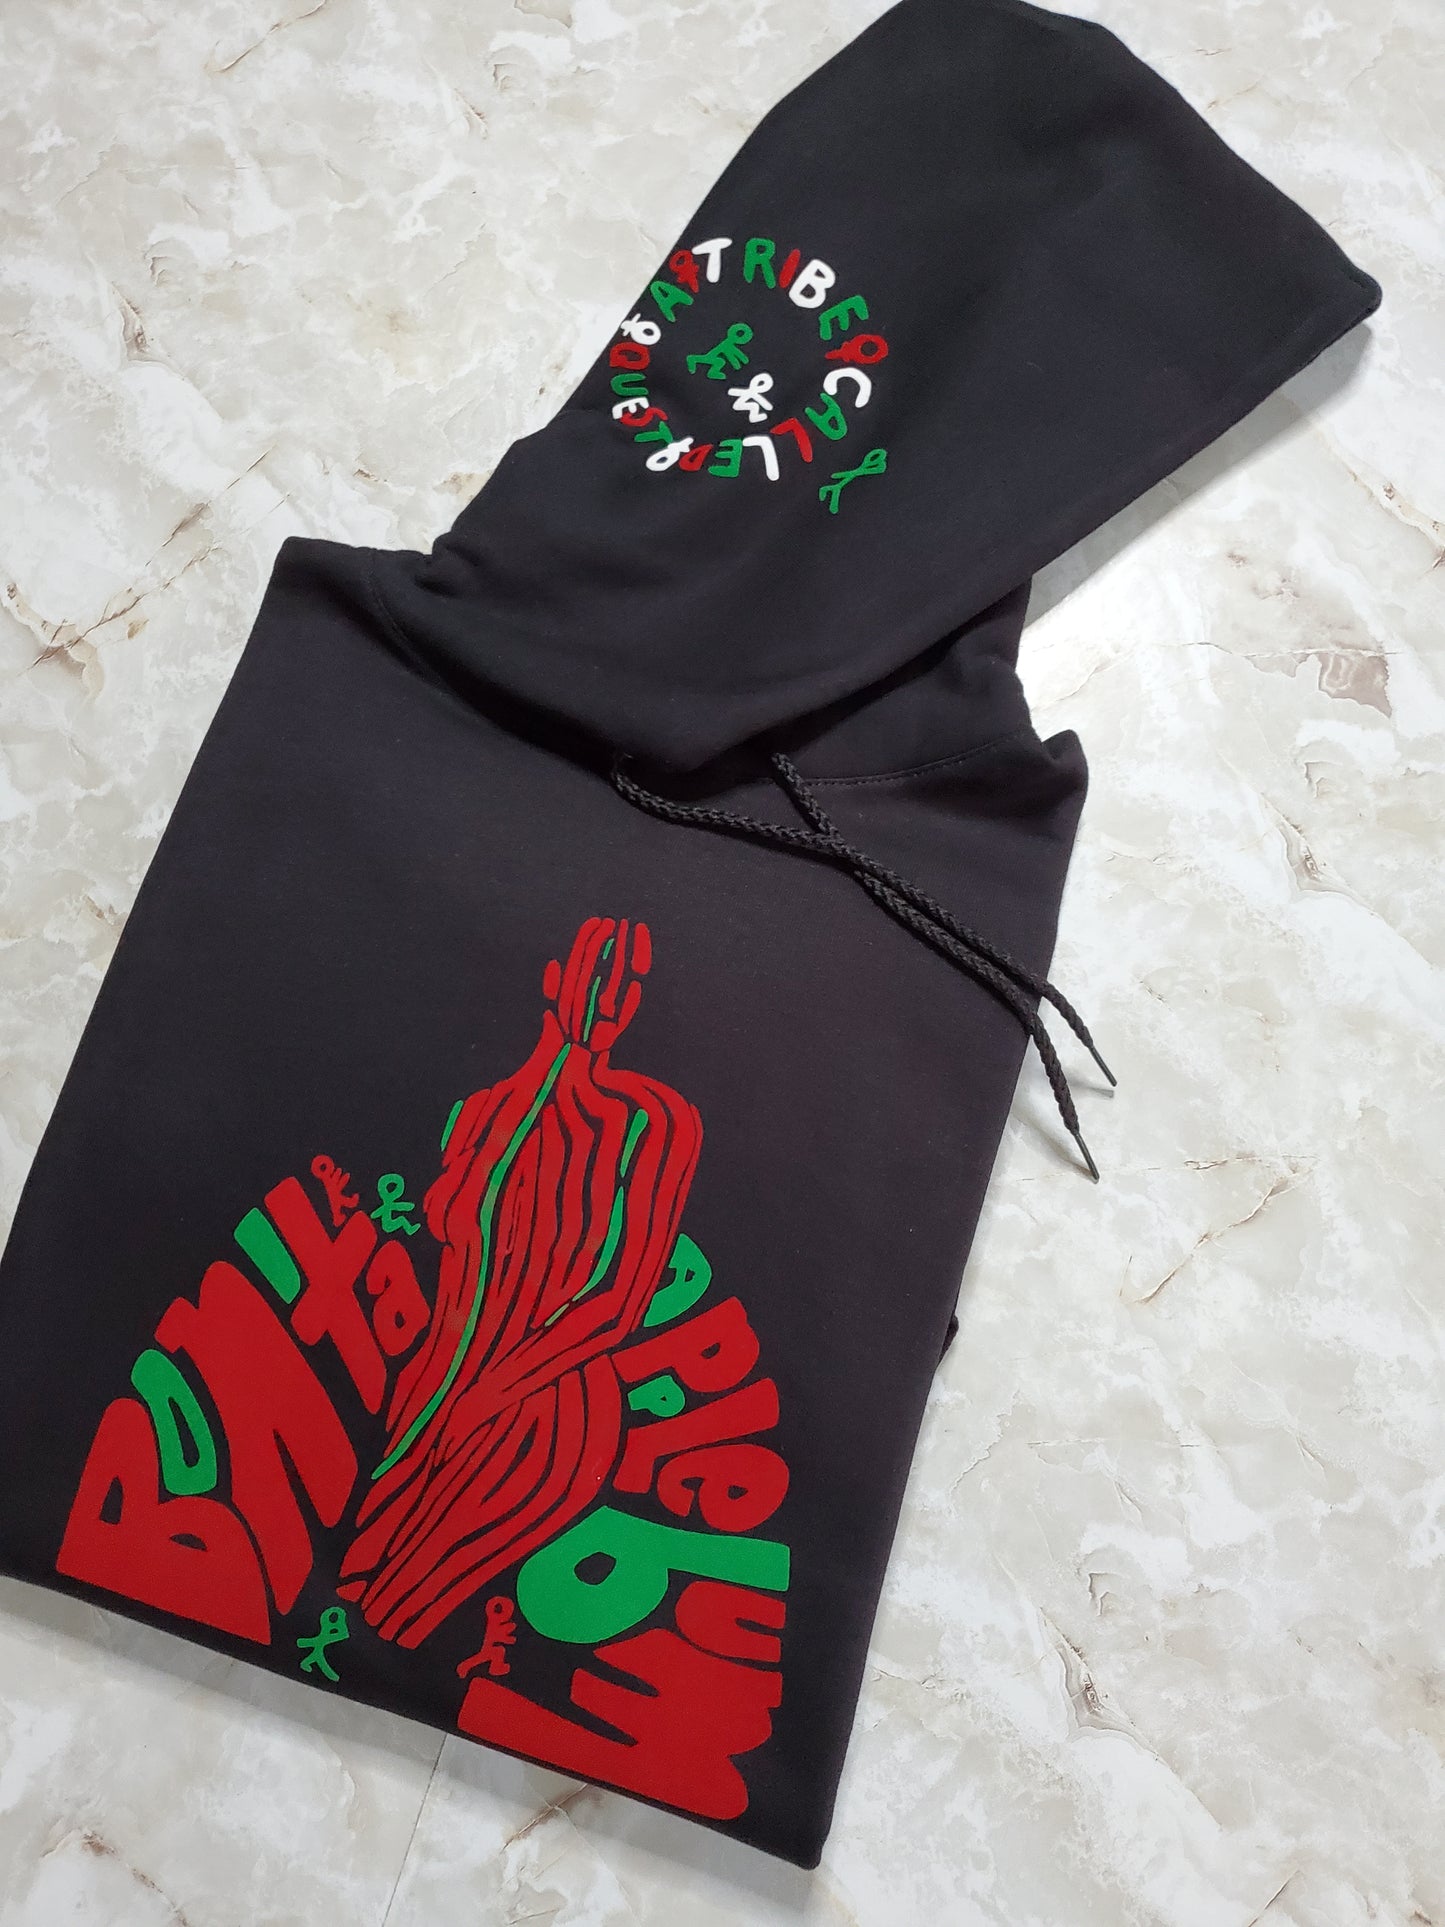 ATCQ Tribute Hoodie - Centre Ave Clothing Co.